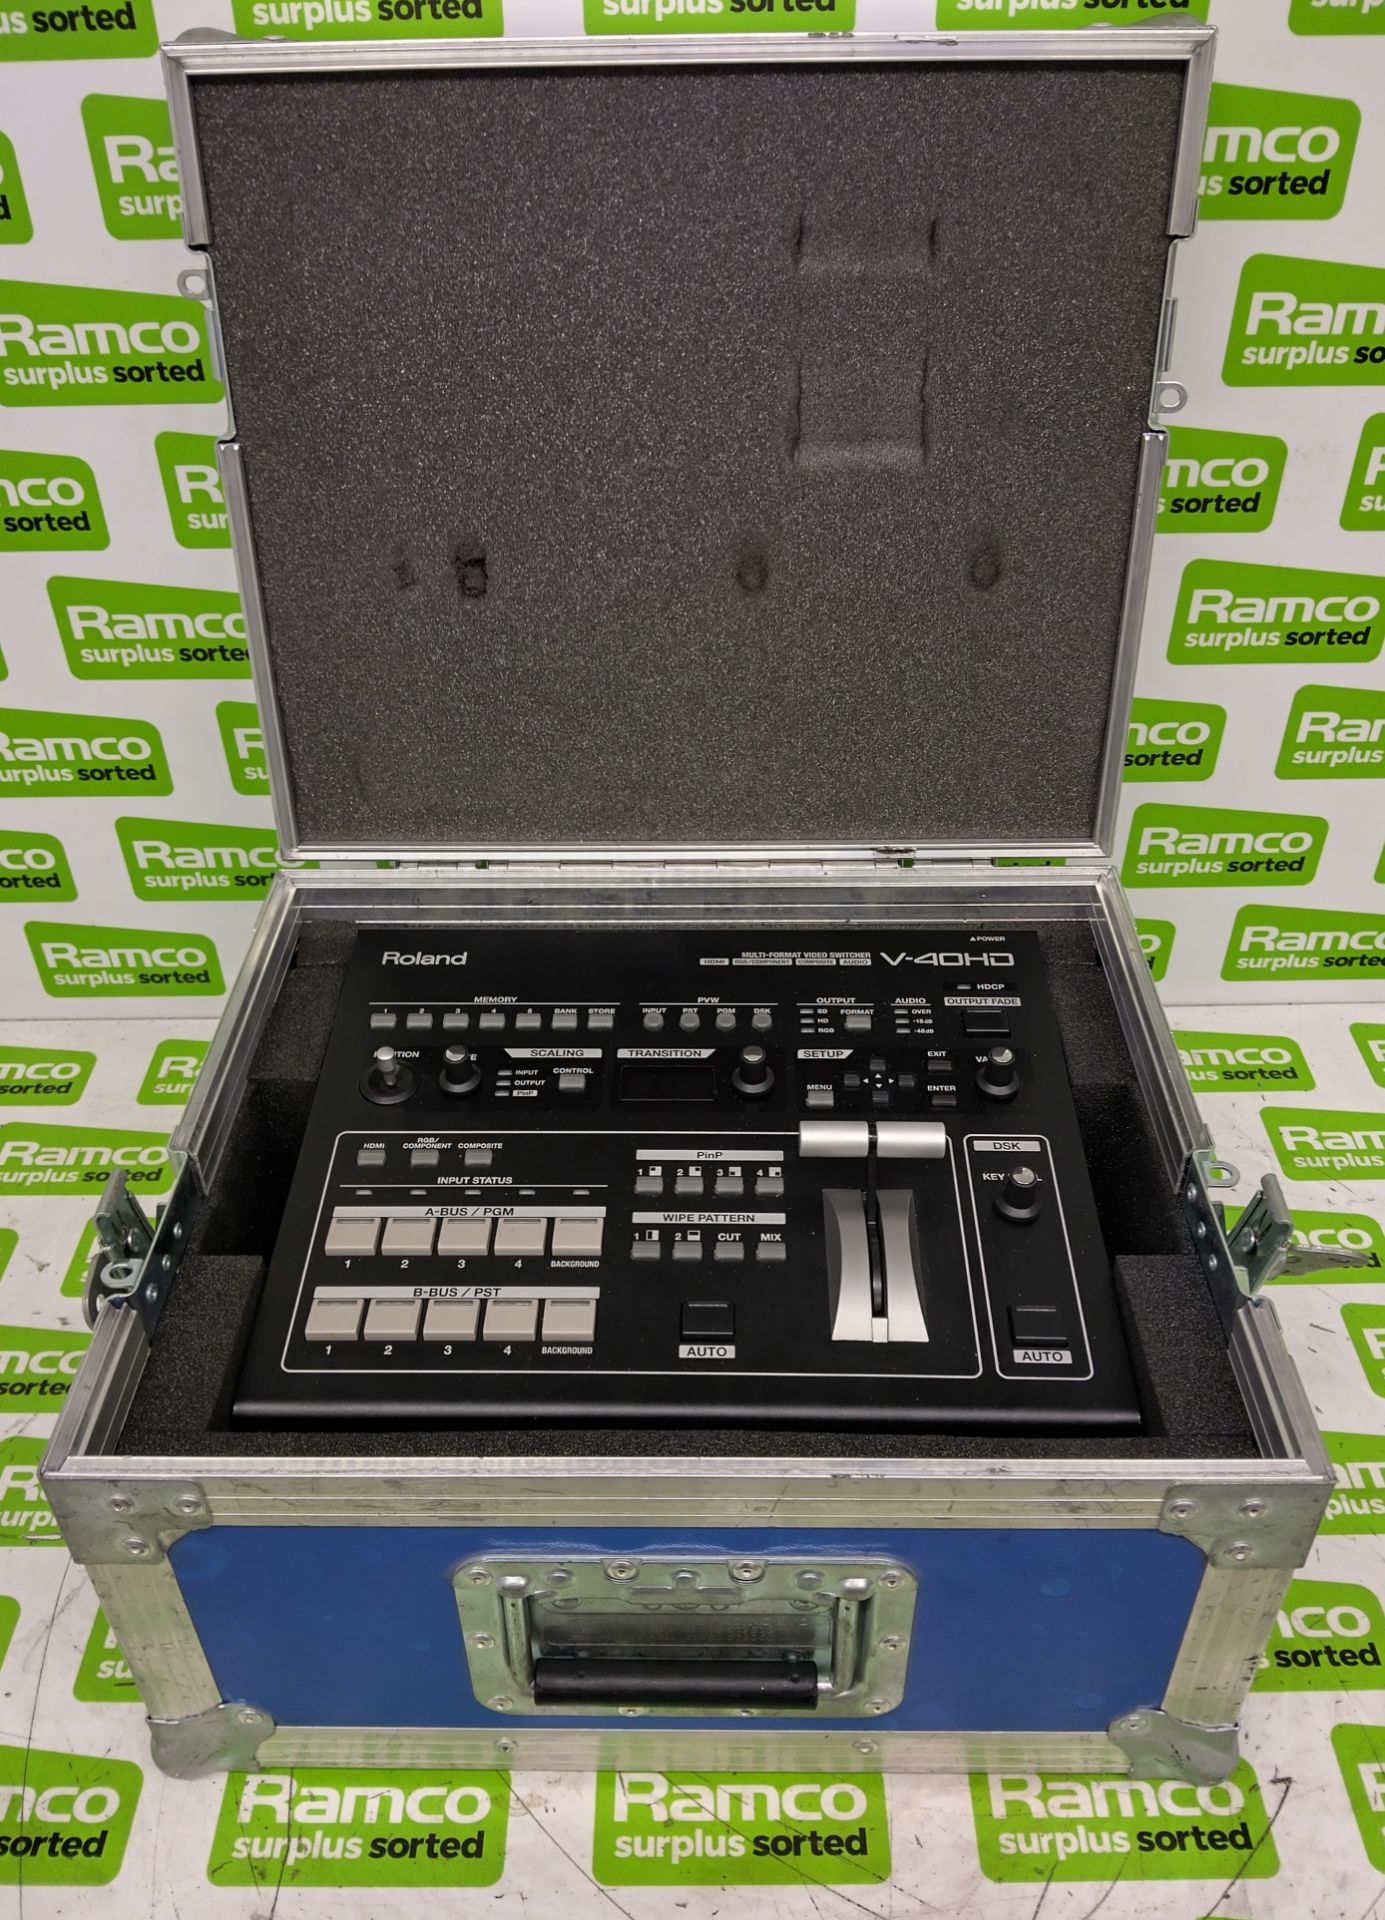 Roland V-40HD multi-format video switcher with flight case